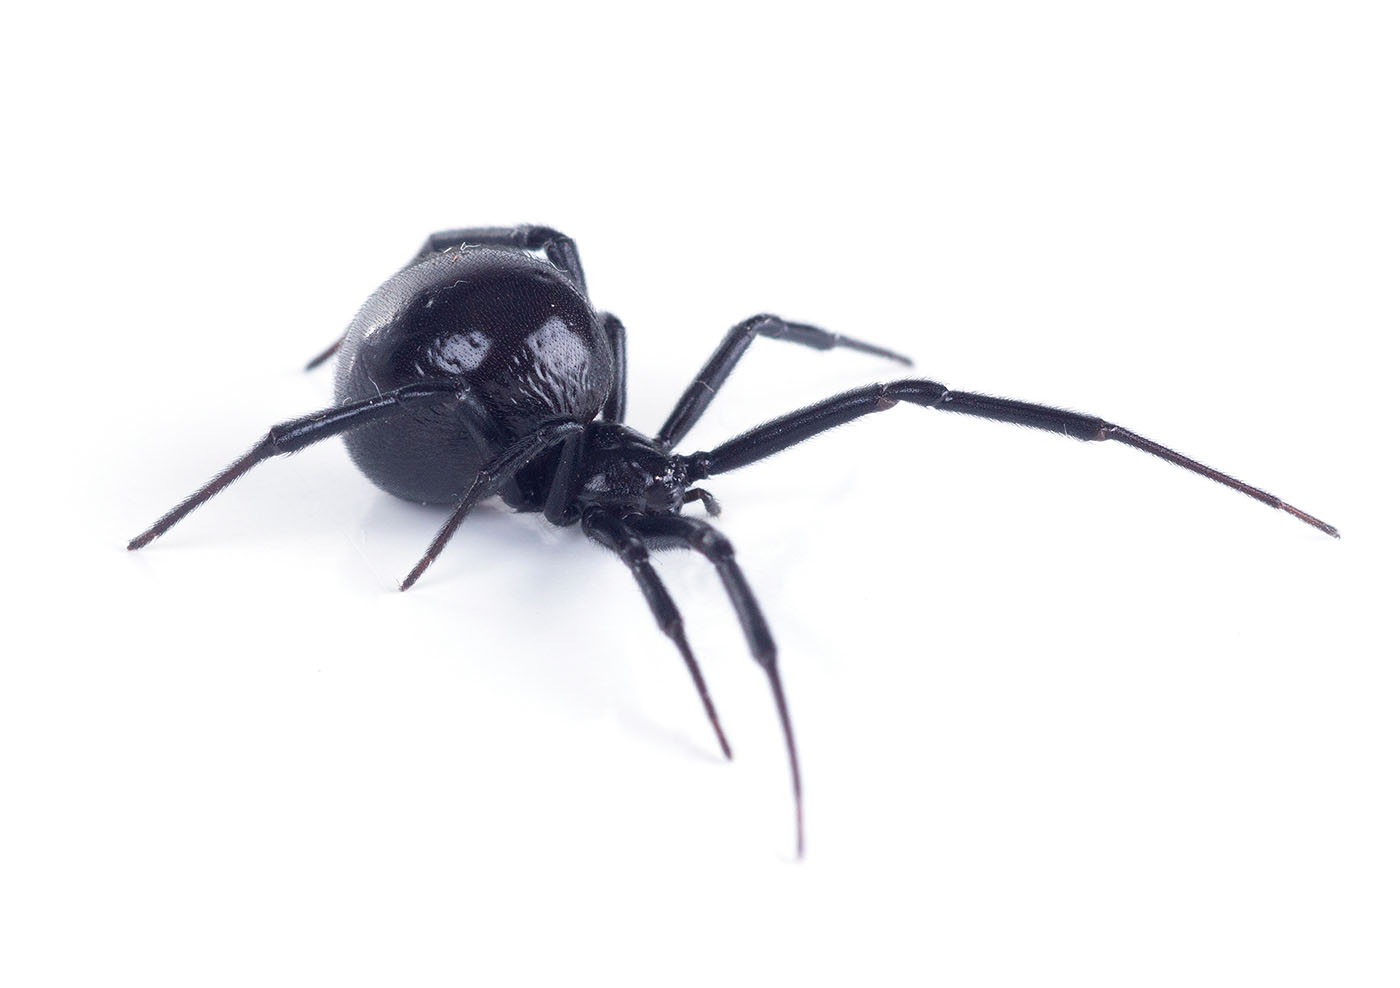 A black spider - contact GGA Pest Management Temple for expert spider identification.